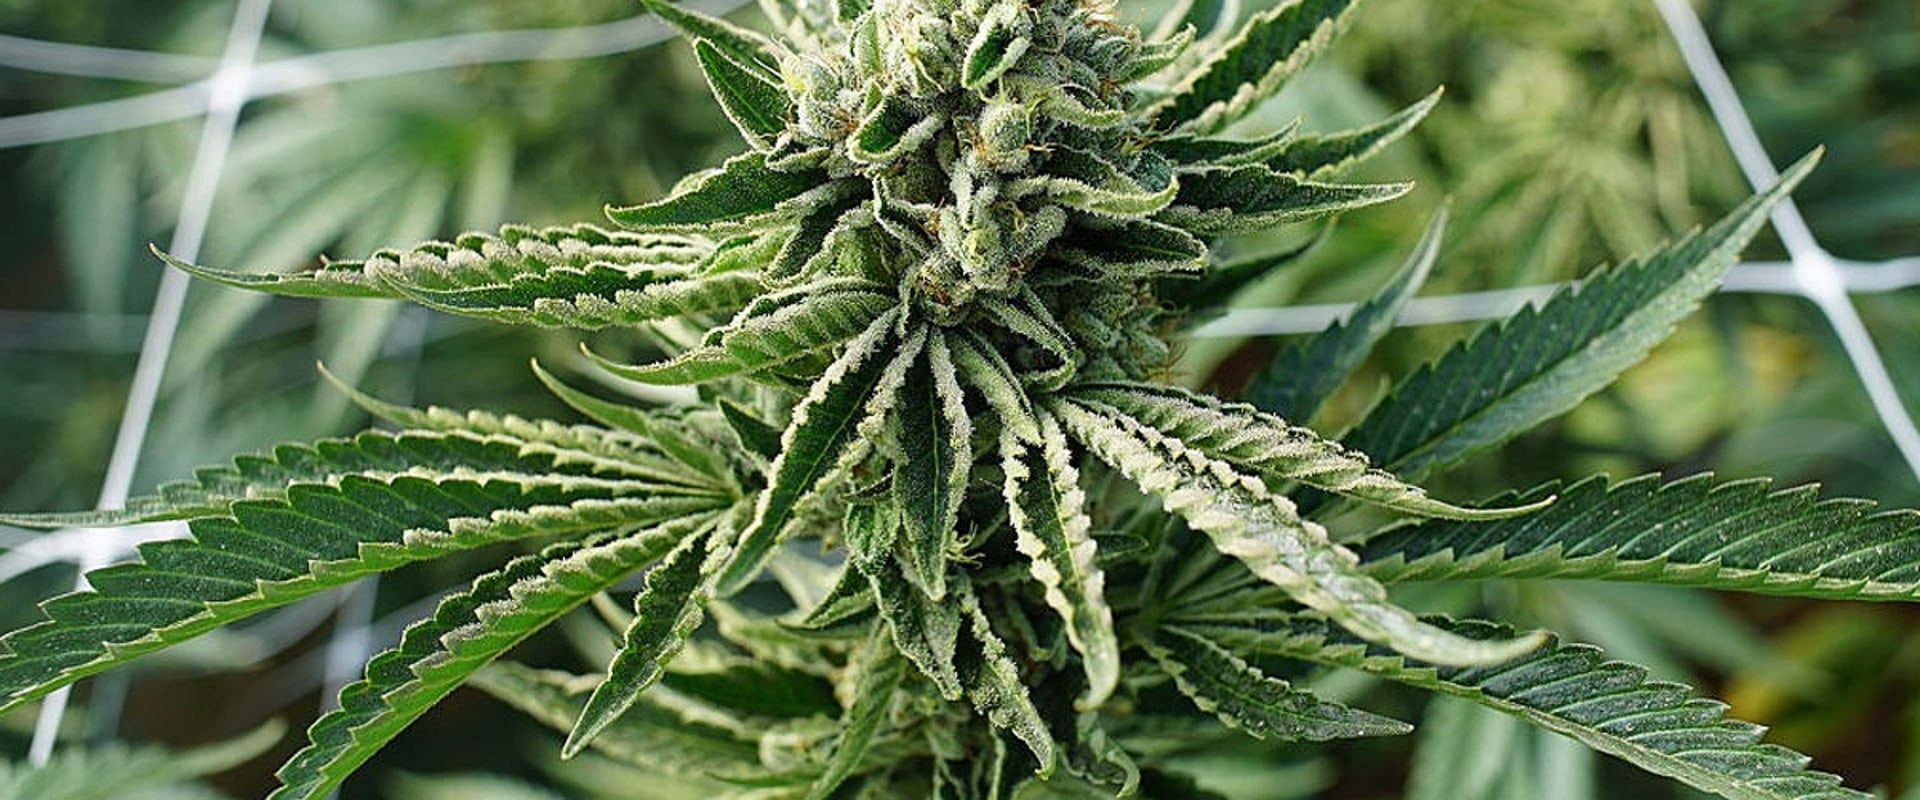 How do you know when sativa is done flowering?